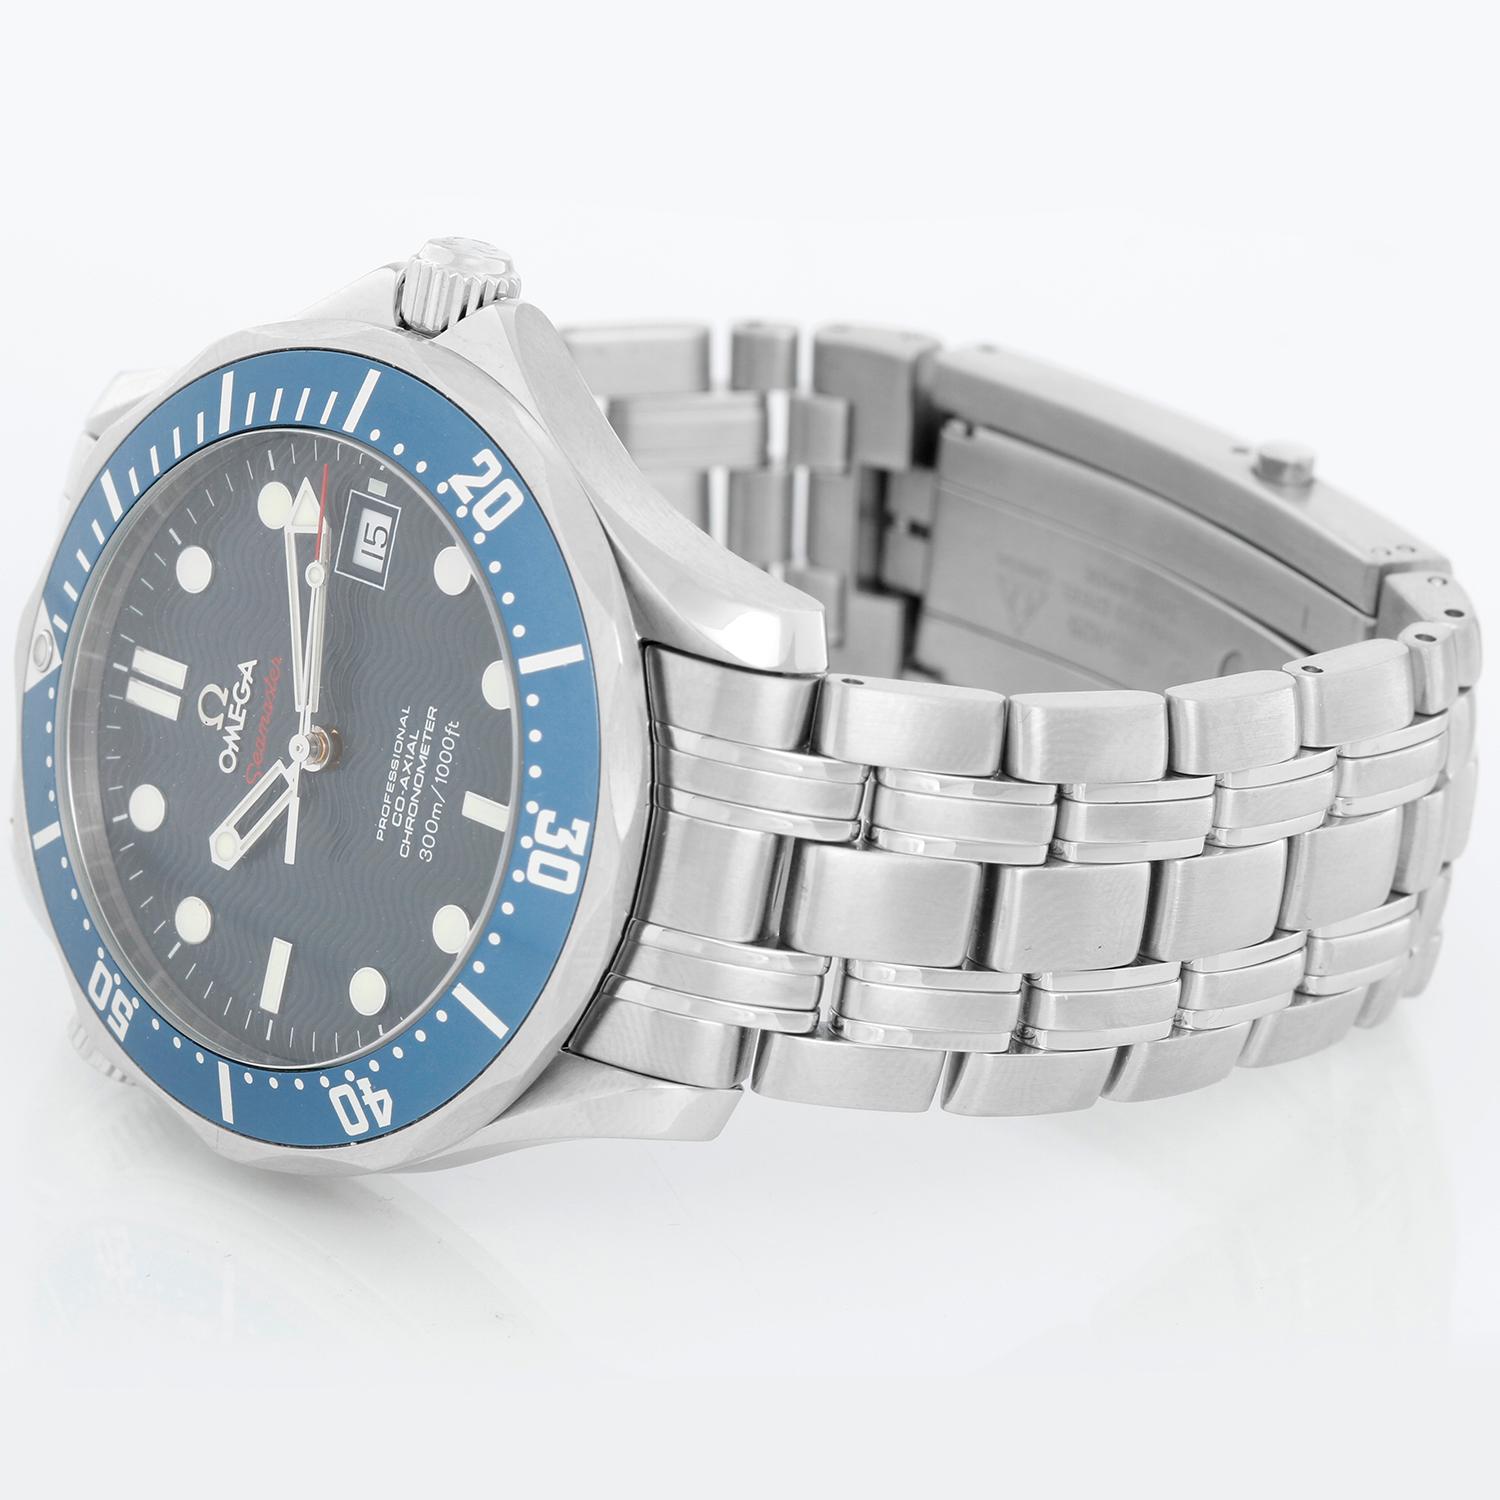 Omega Seamaster Stainless Steel Diver 300M Men's Watch 2220.80.00 - Automatic winding. Stainless steel case ( 41 mm) with blue unidirectional bezel. Blue dial with luminous markers. Stainless steel Seamaster bracelet. Pre-owned with omega box.
All